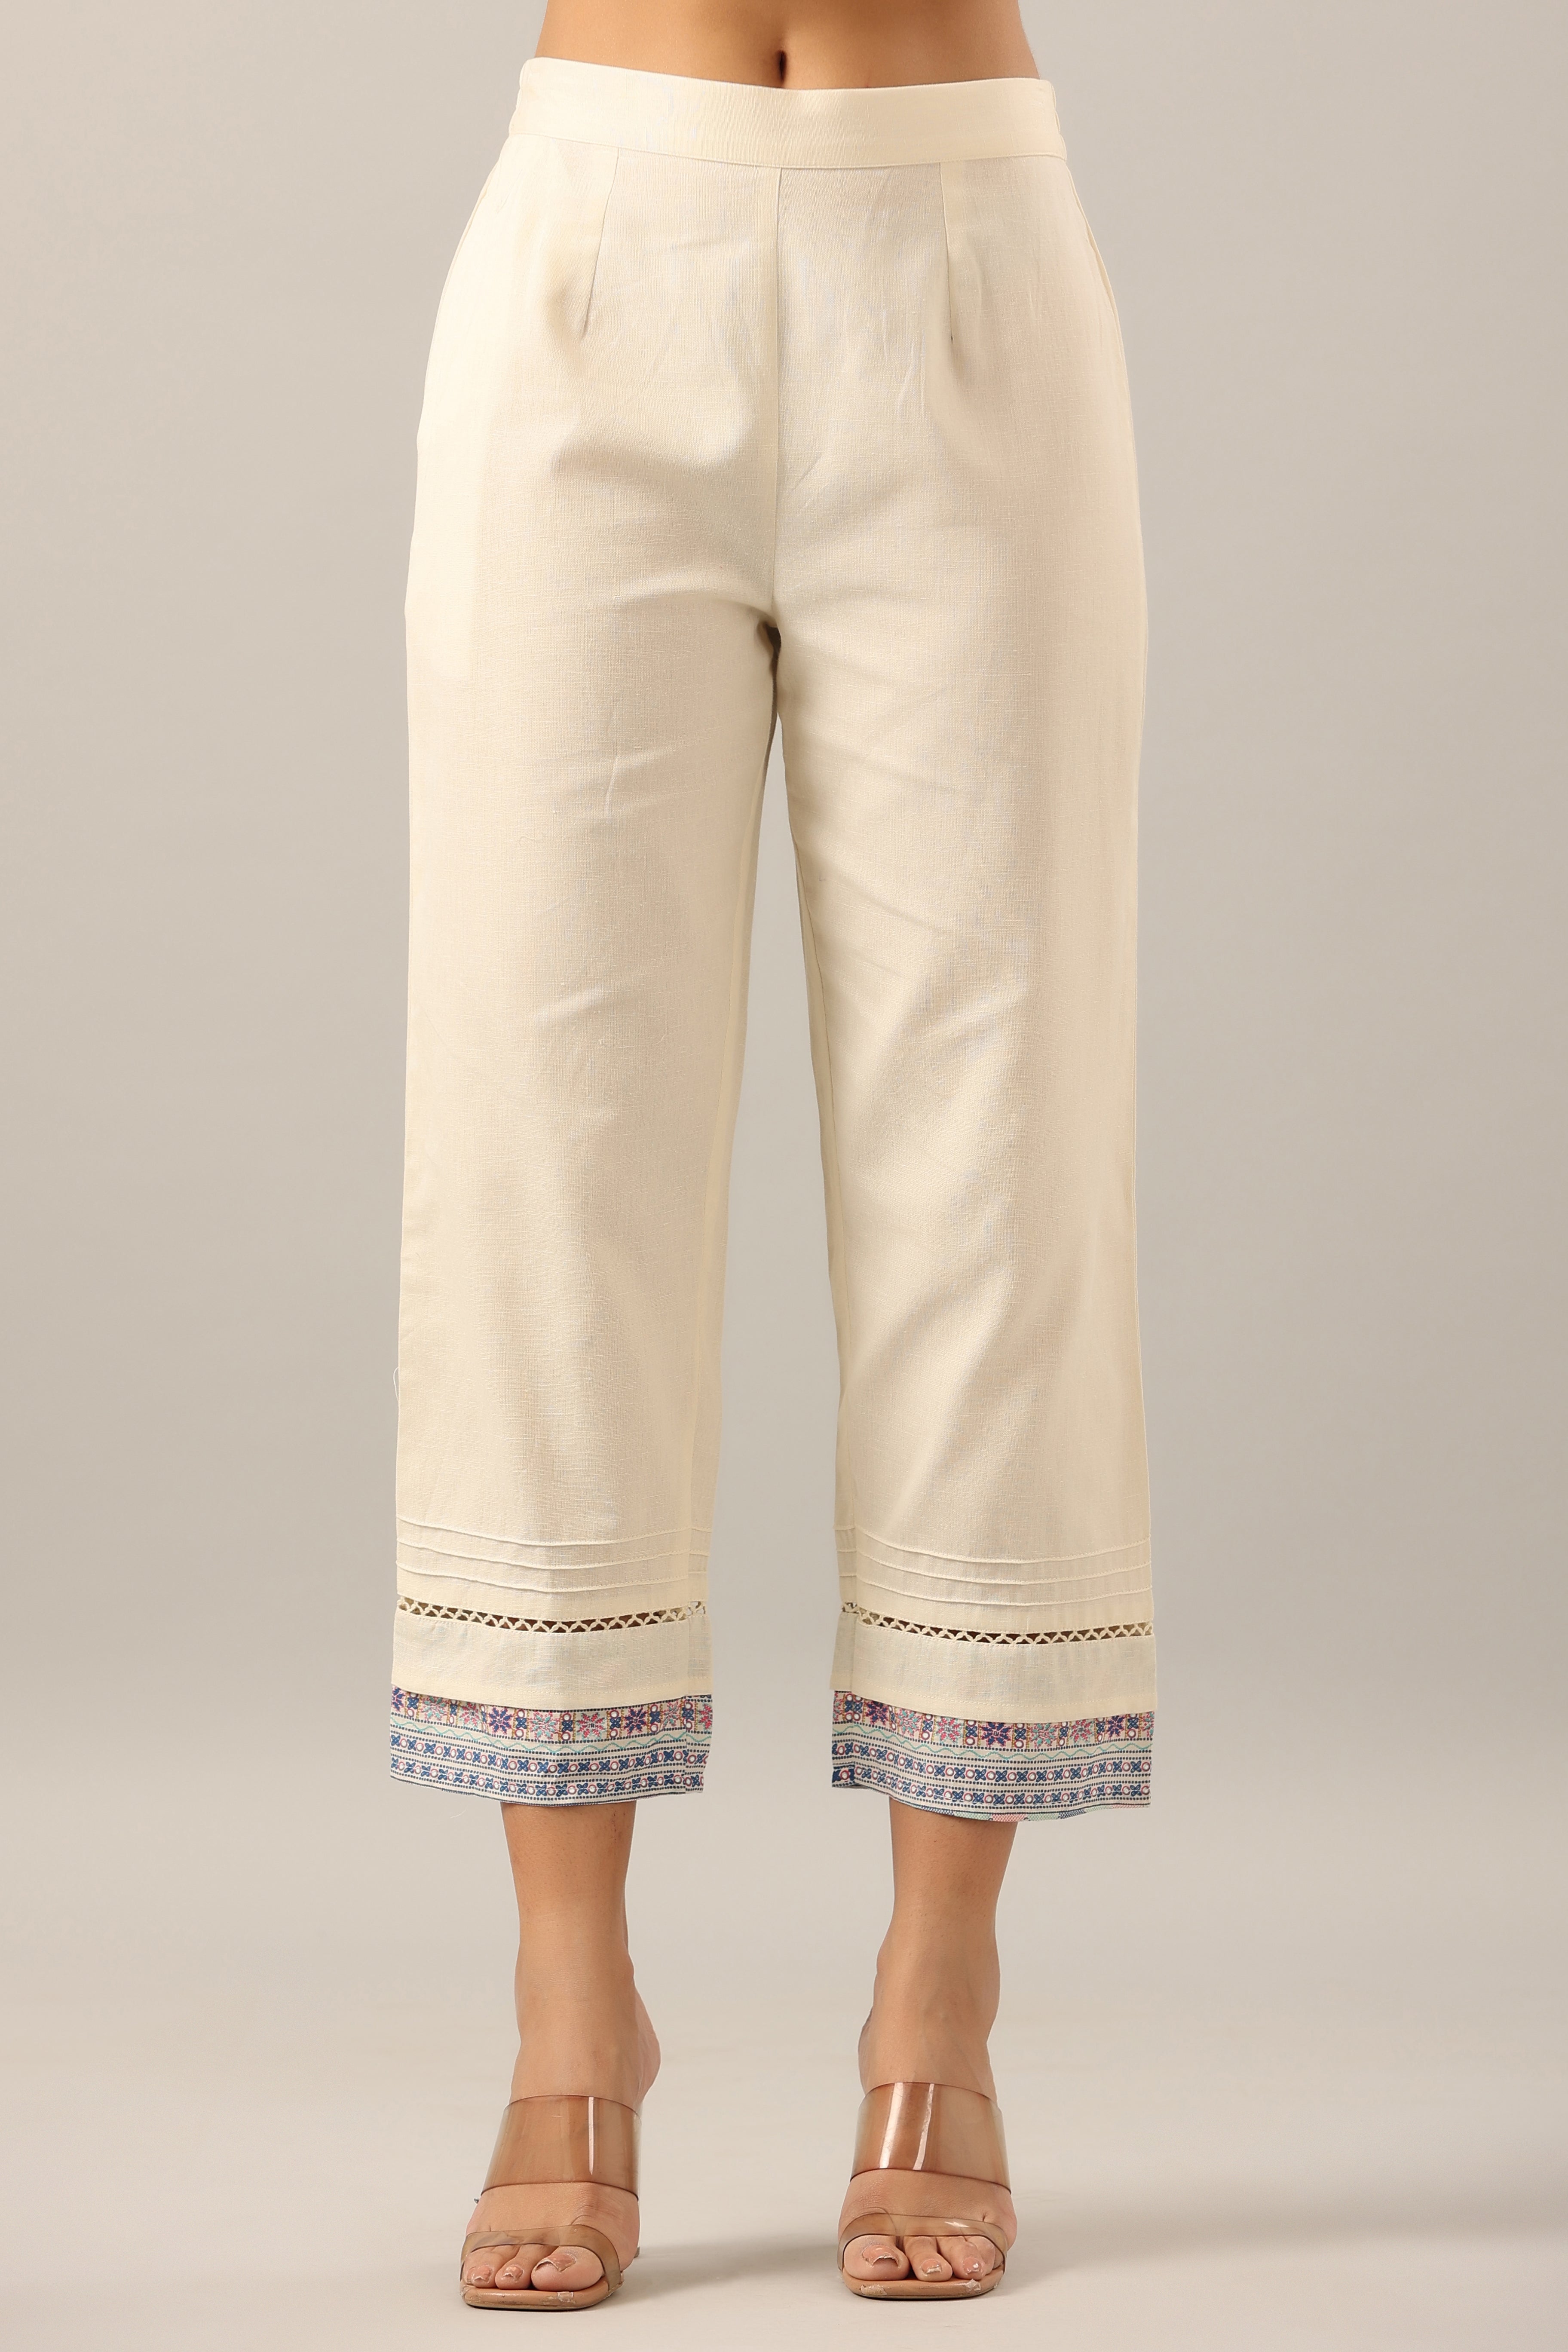 Juniper Off-White Solid Cotton Flex Pants With Printed Hem, Pintucks & Lace Work